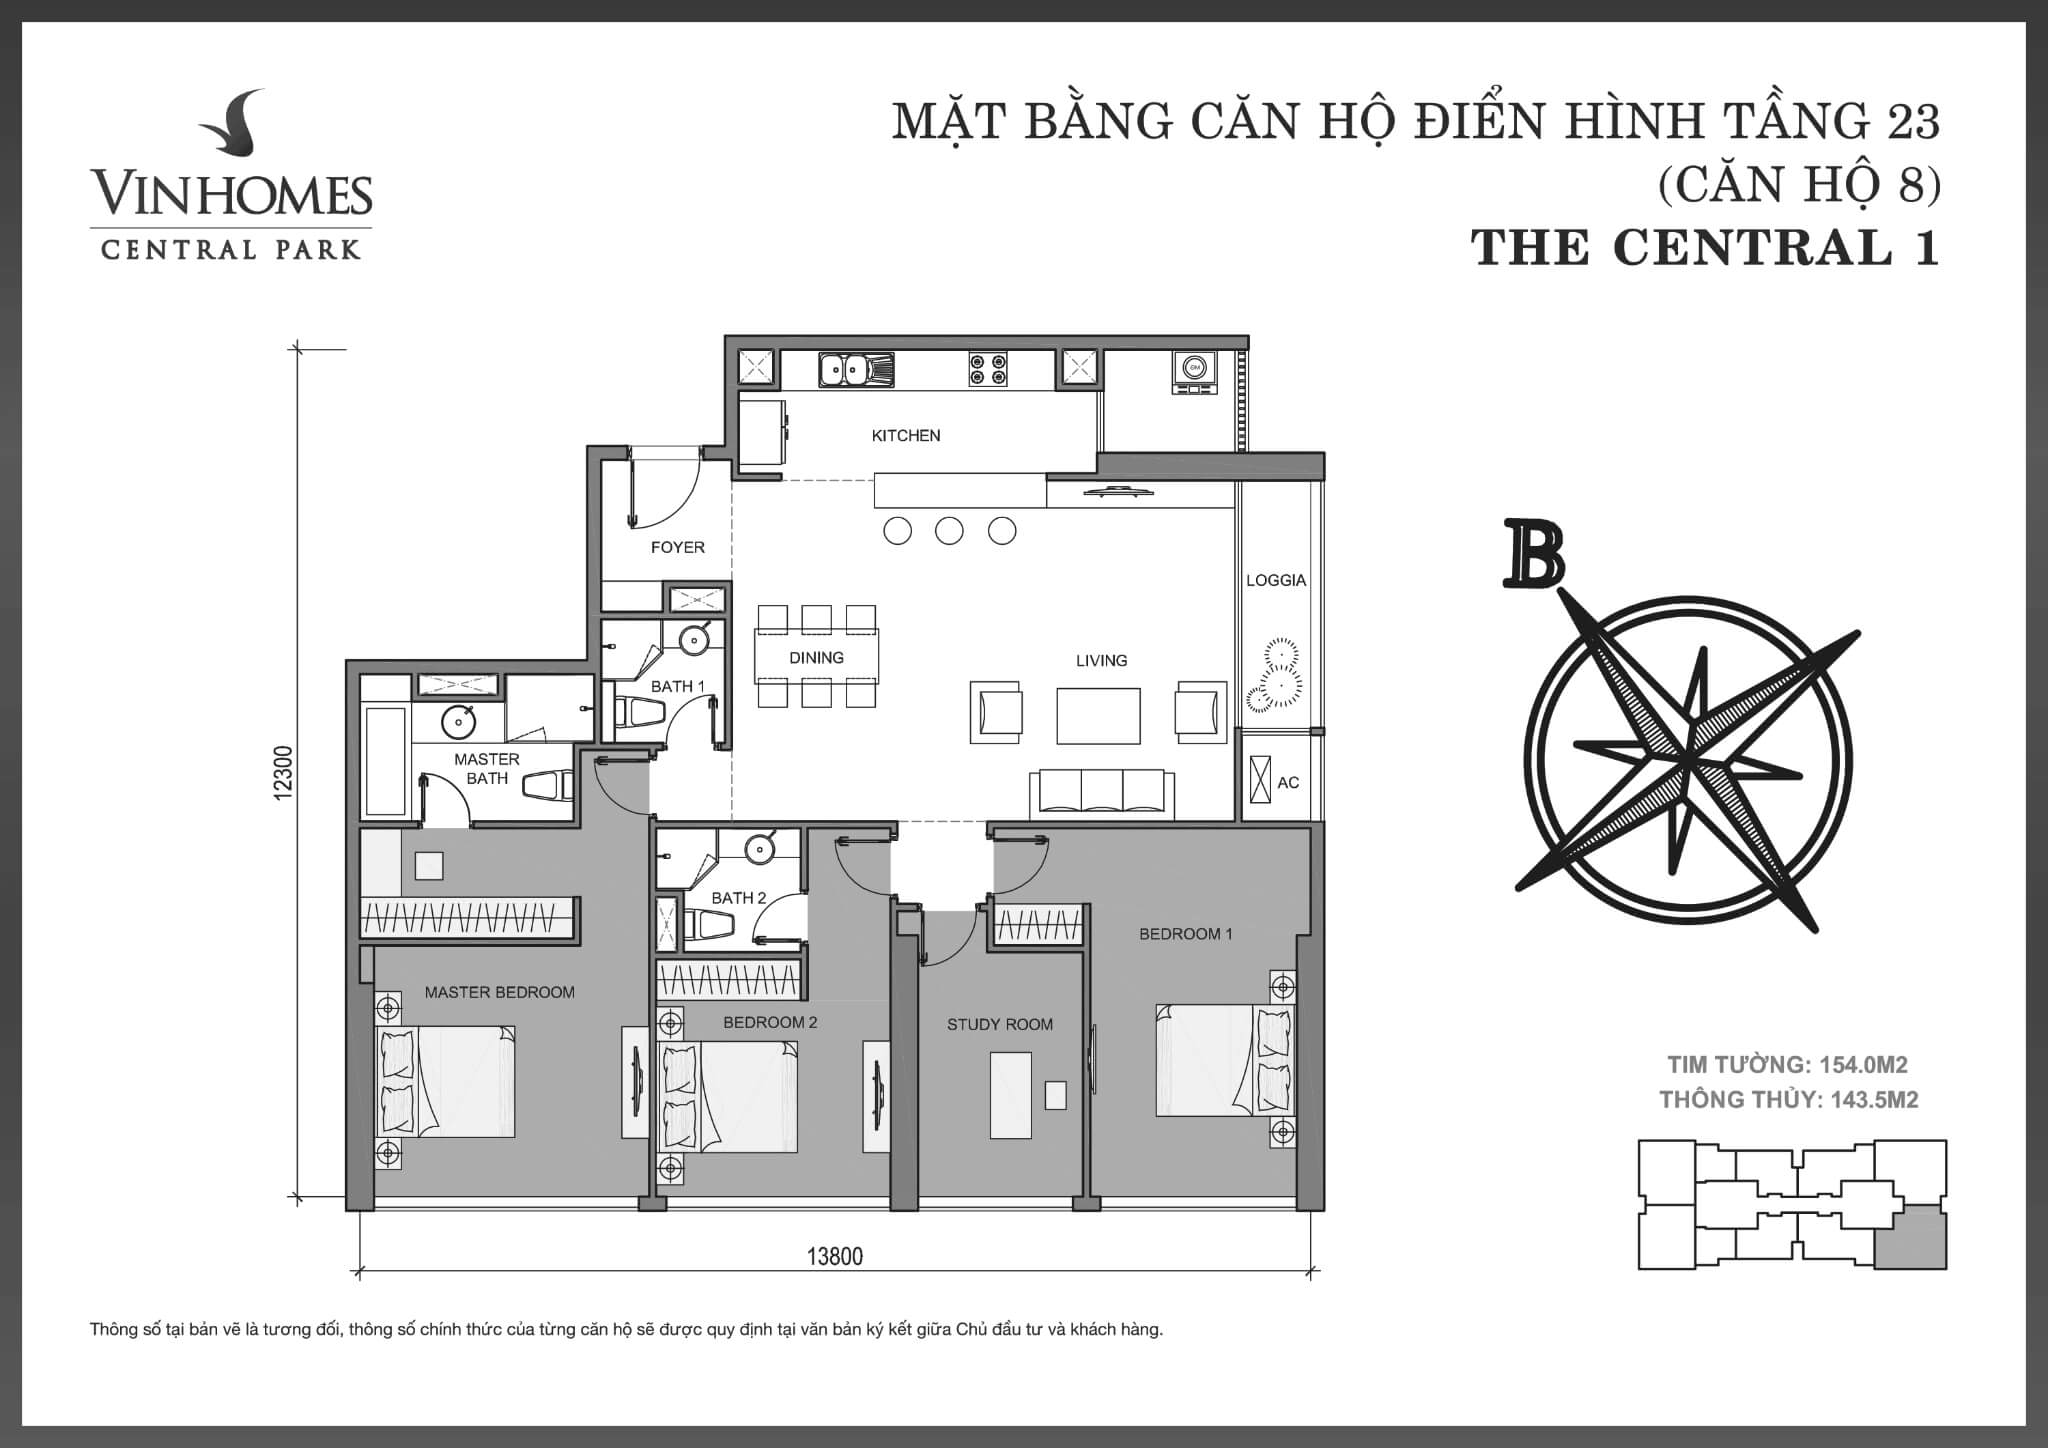 Layout C1-08 tầng 23 | Central 1 - Vinhomes Central Park